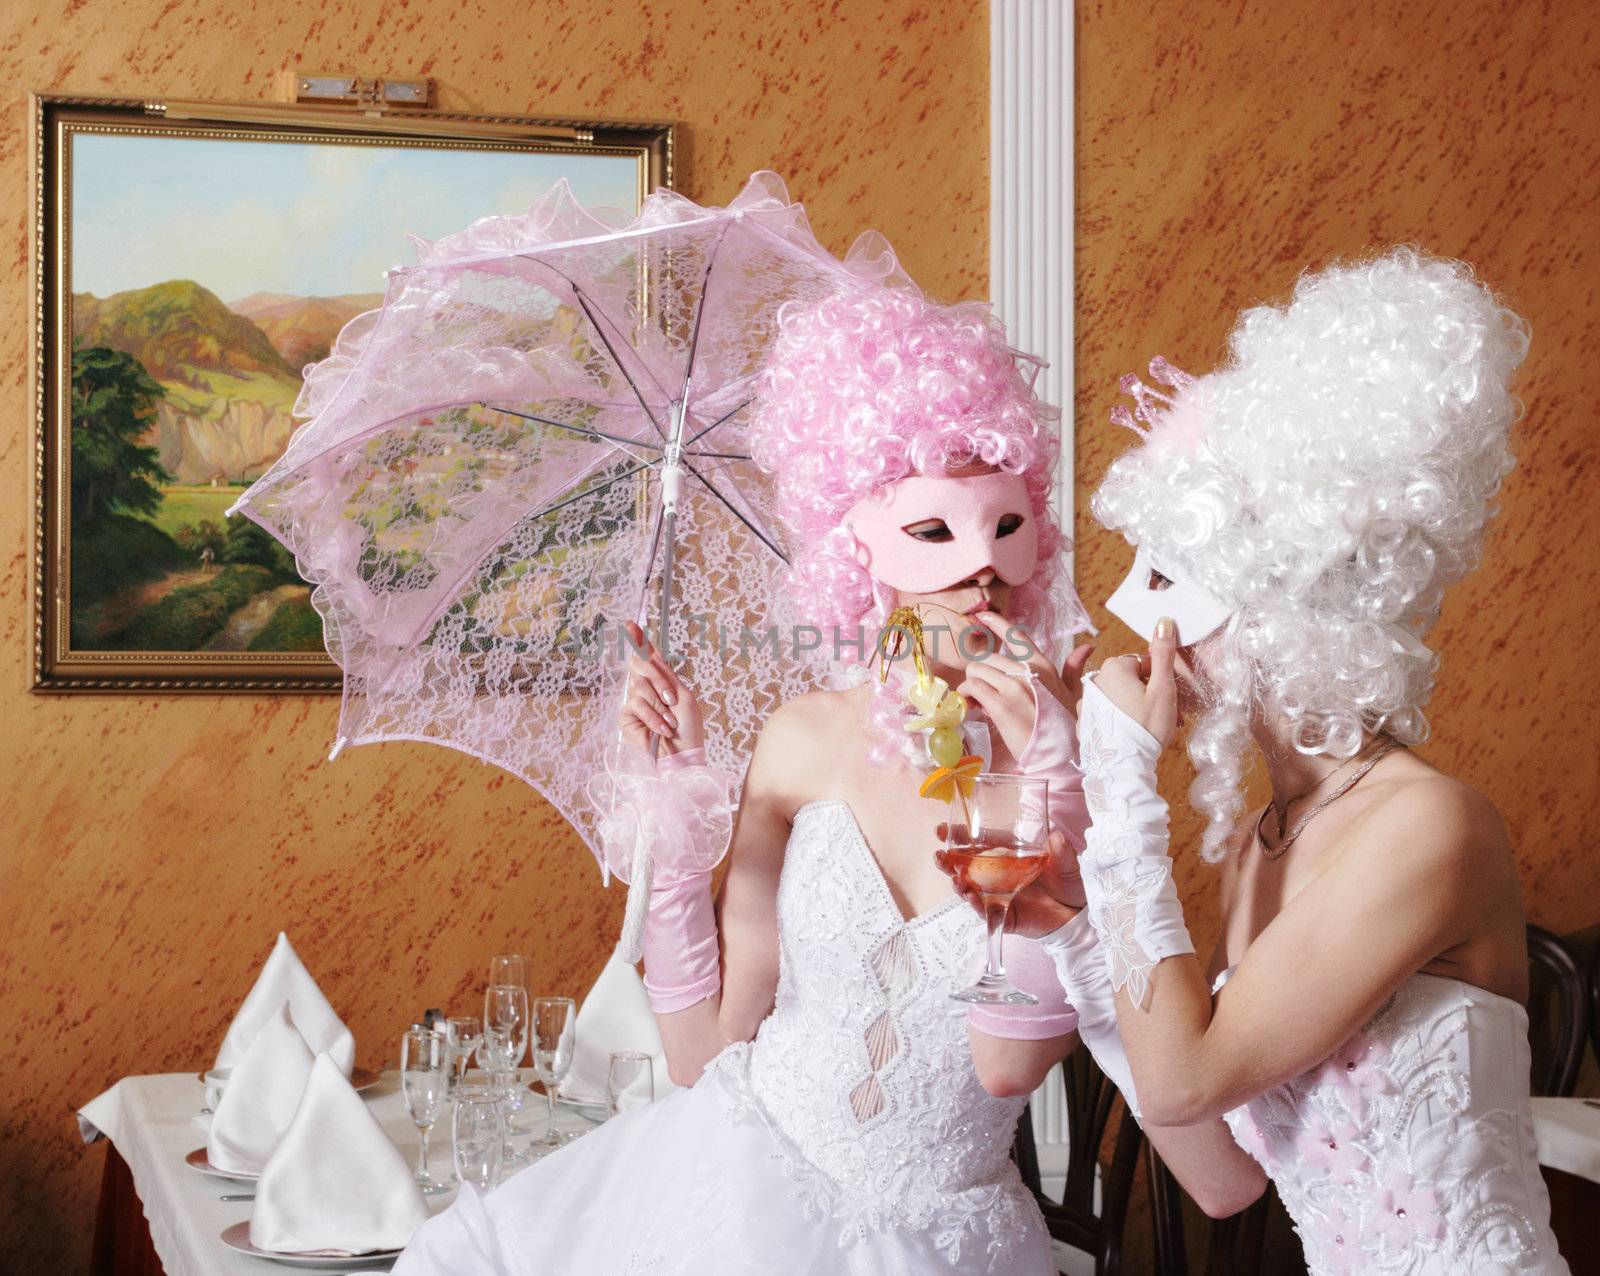 Two girls in wedding dresses and masks
